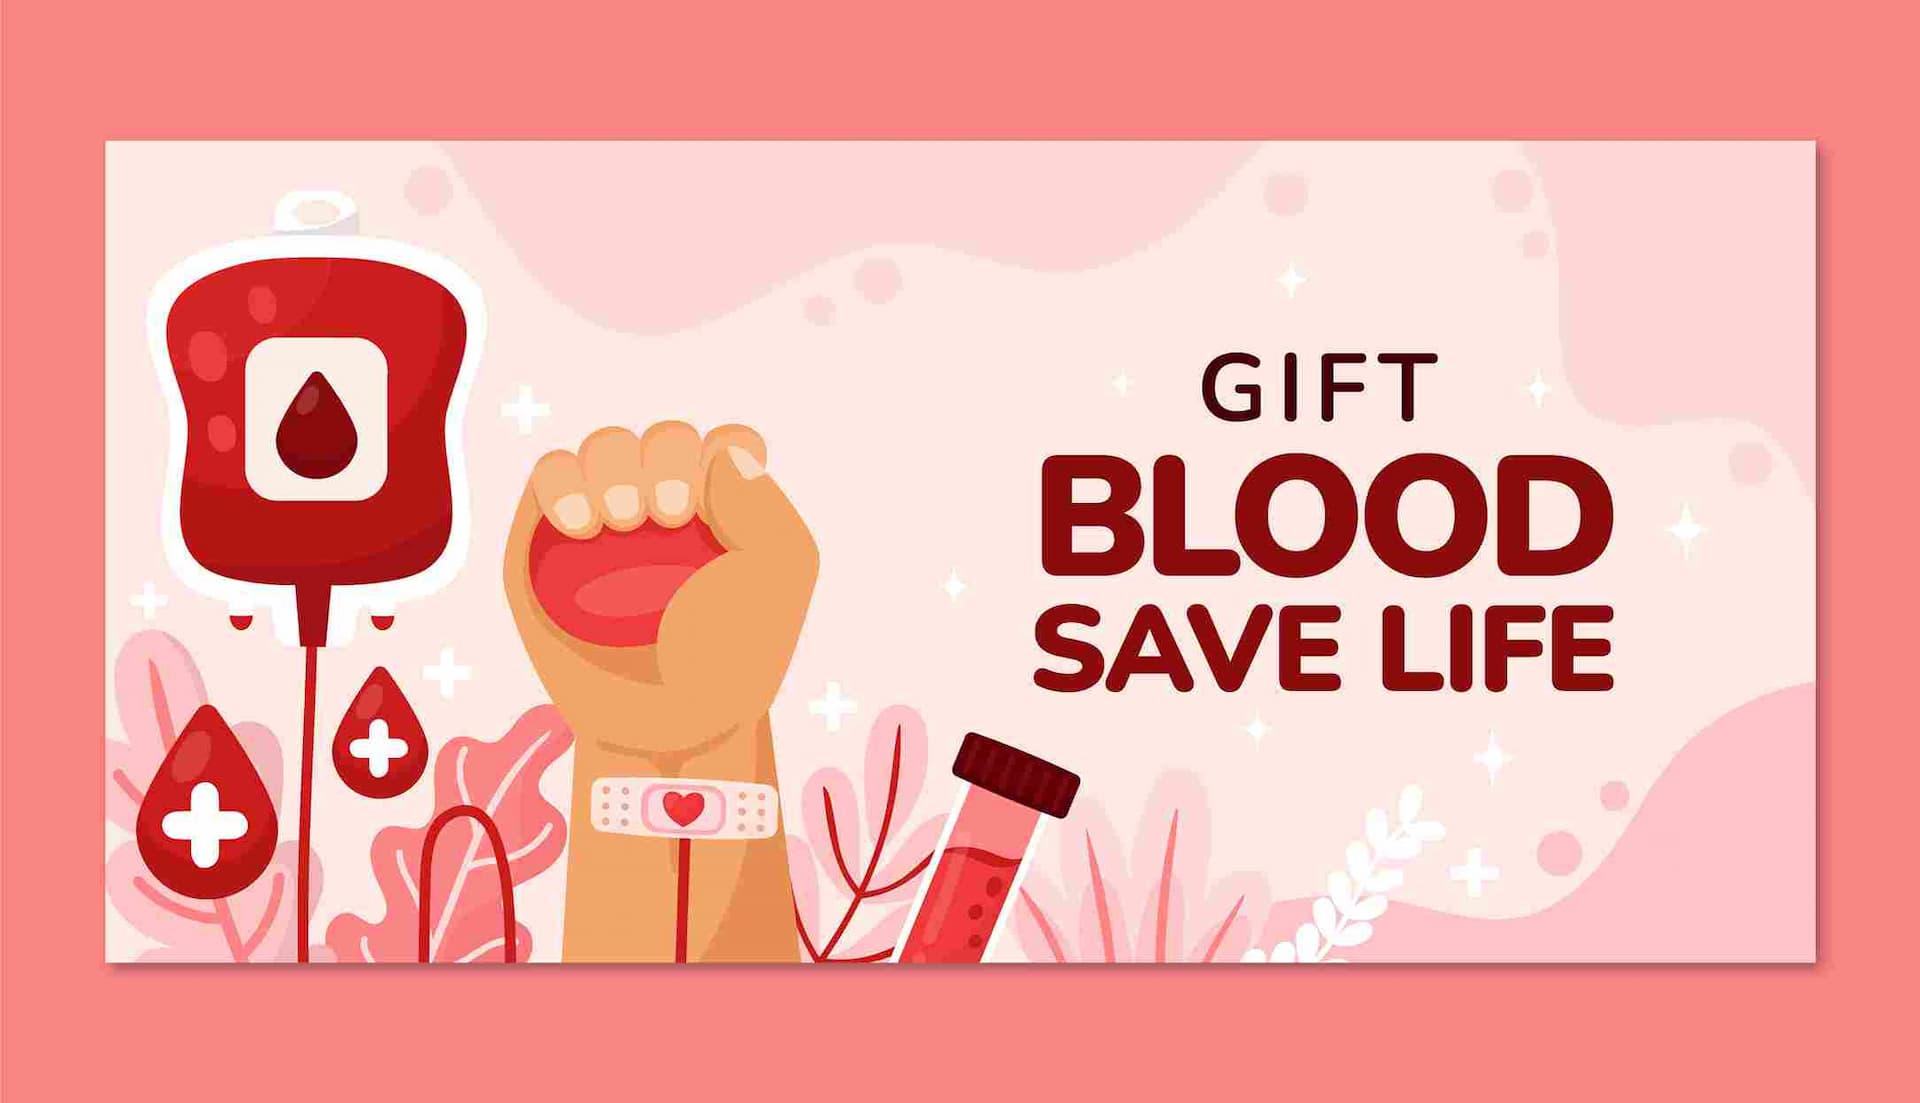 Reasons to Donate Blood: Health Benefits, Importance, & More